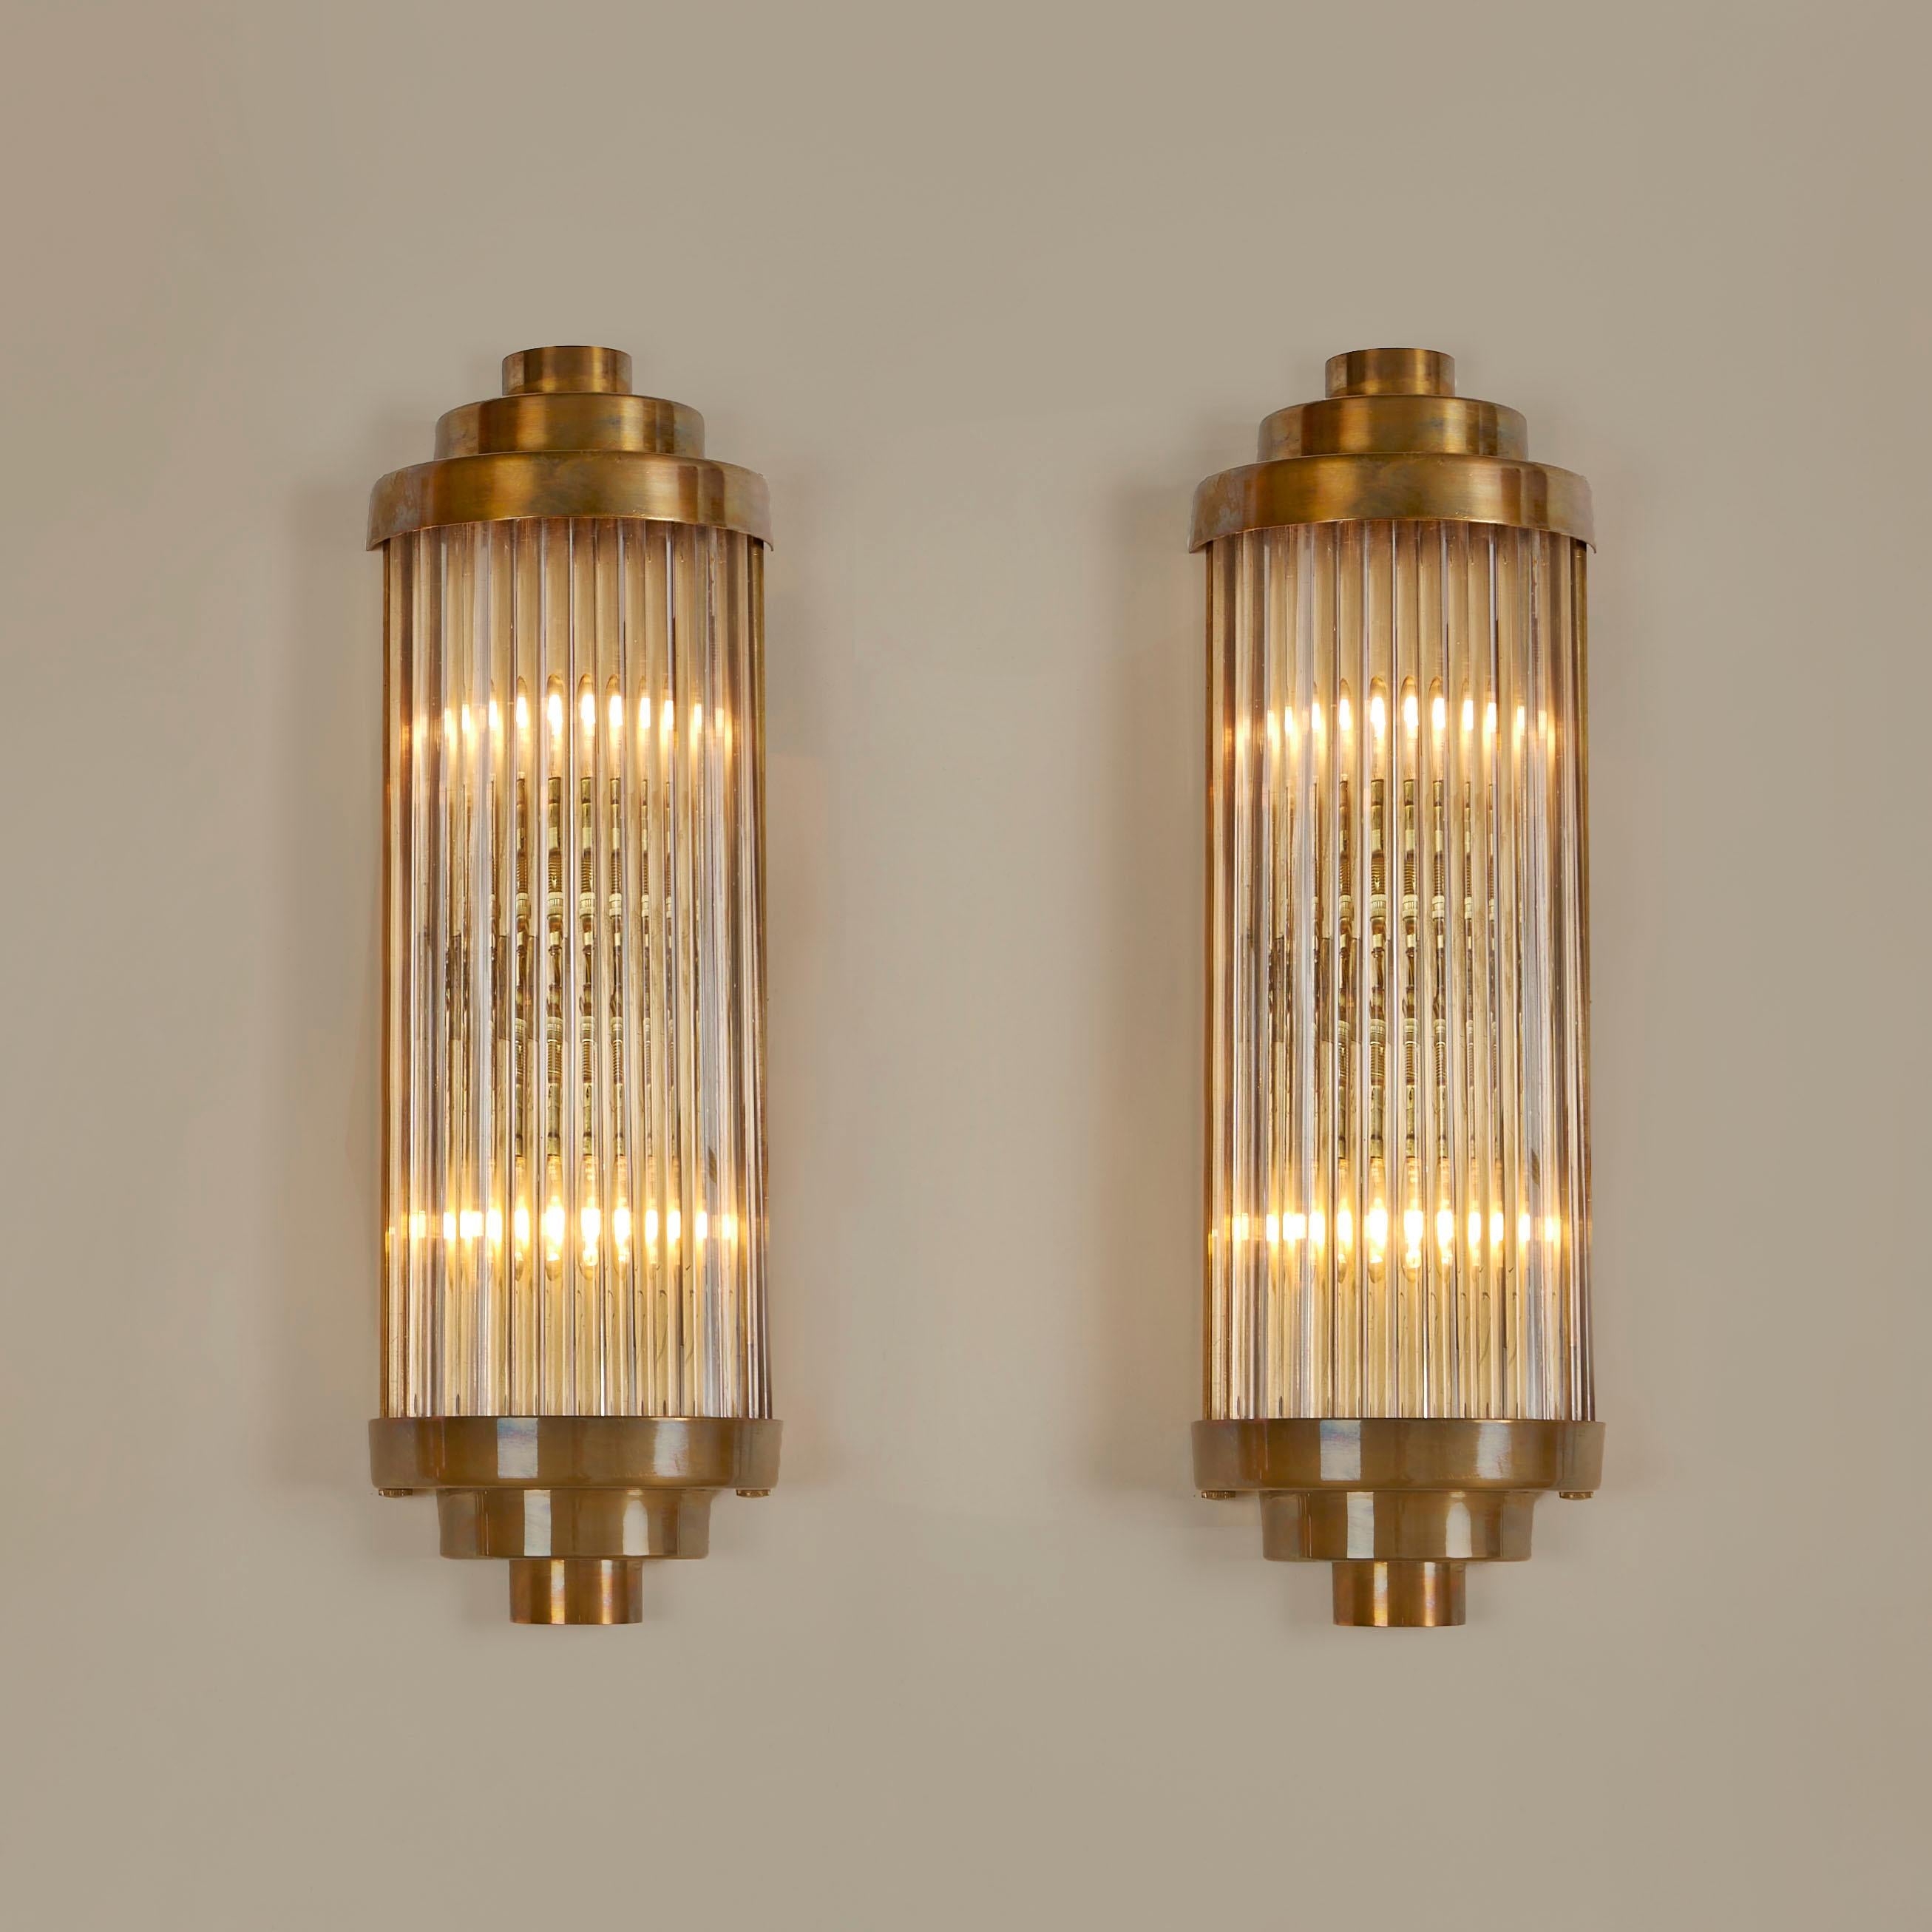 These ‘Ravello’ wall lights takes its inspiration from a timelessly classic Art Deco design.
Multiple Italian glass rods form a semi-circle which is capped, top and bottom by 3 tiers of curved brass. The brass back plate holds two light bulbs and